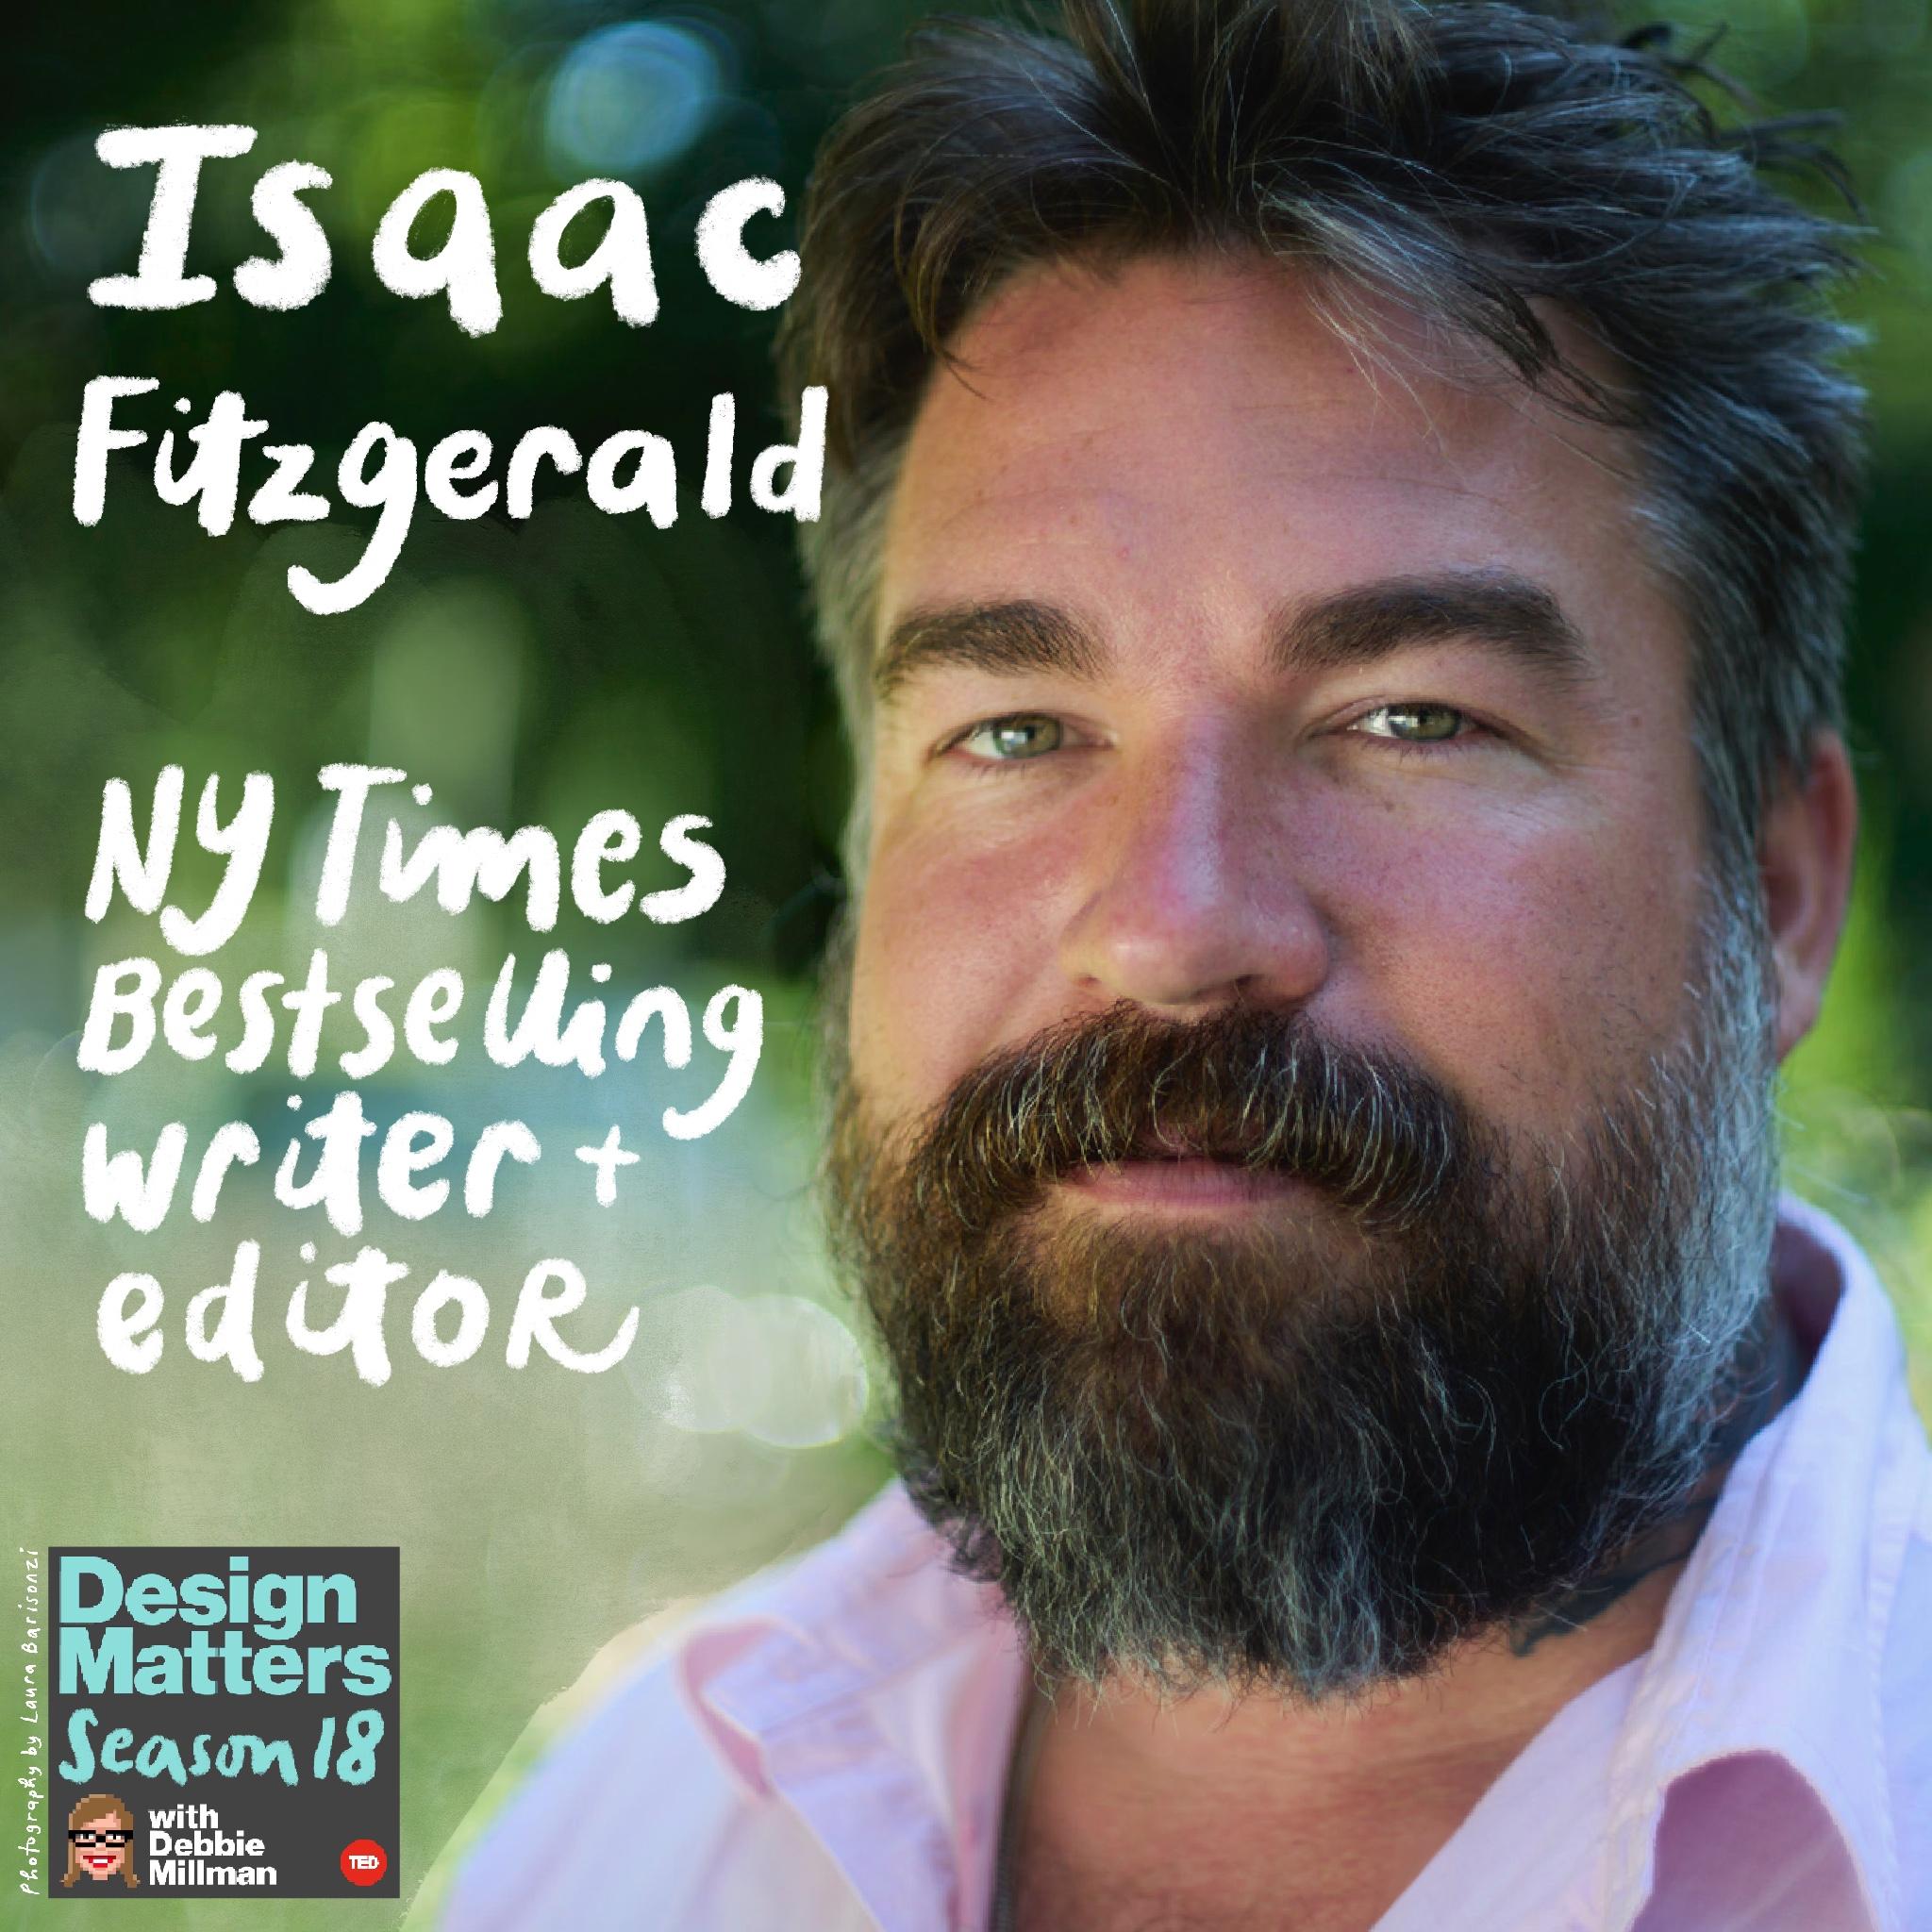 Thumbnail for "Isaac Fitzgerald".